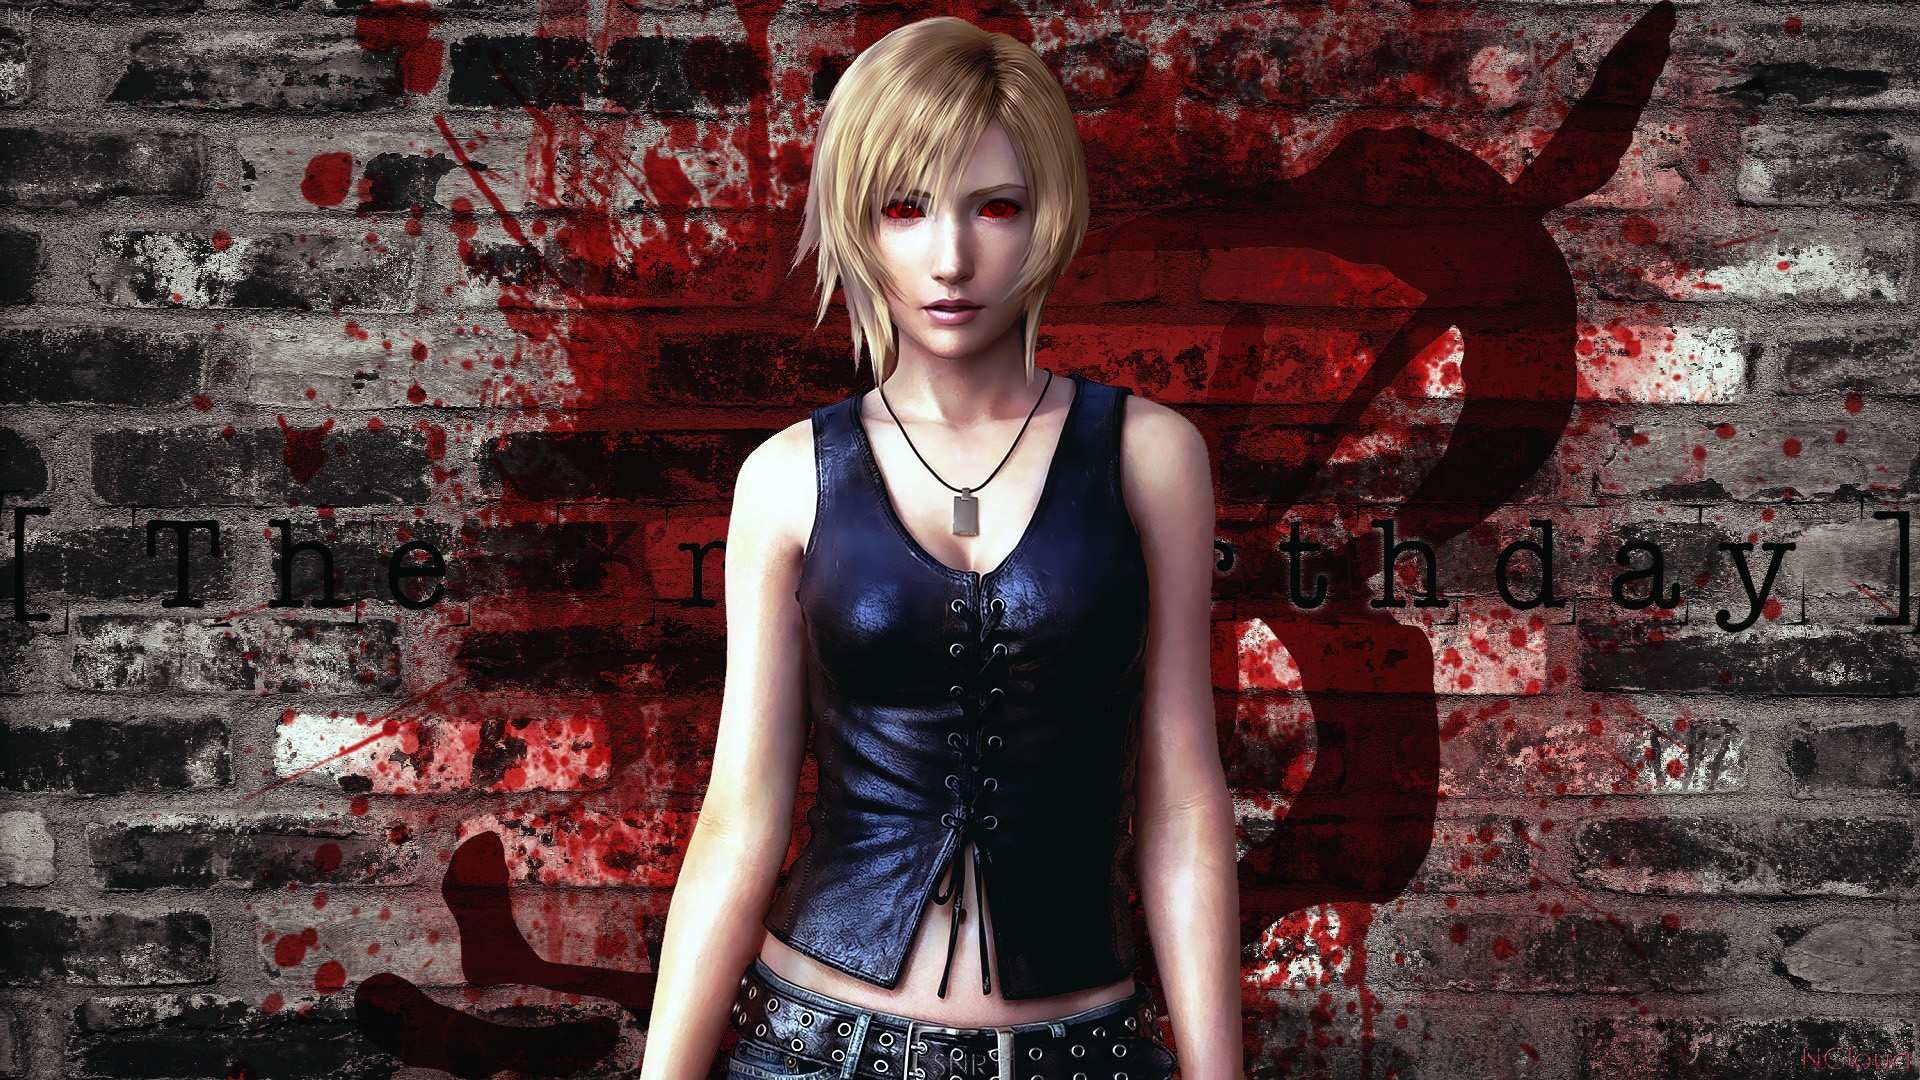 parasite-eve-2-wallpaper-58-pictures